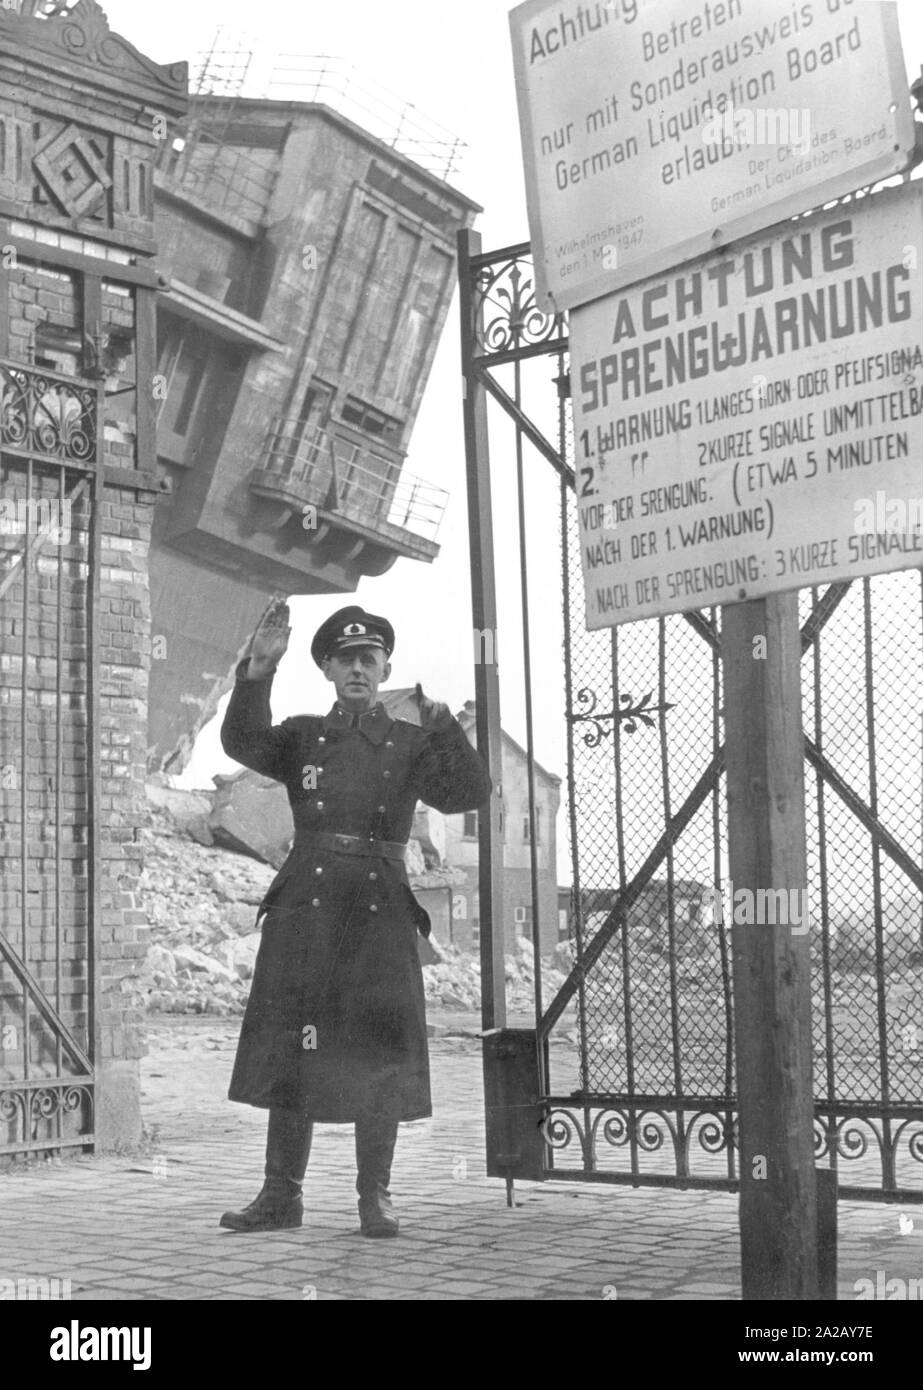 A guard at the gate to the port facilities in Wilhelmshaven. Right next to the gate there is a sign warning of blasting. The guard is a member of a plant security service or company police. Stock Photo